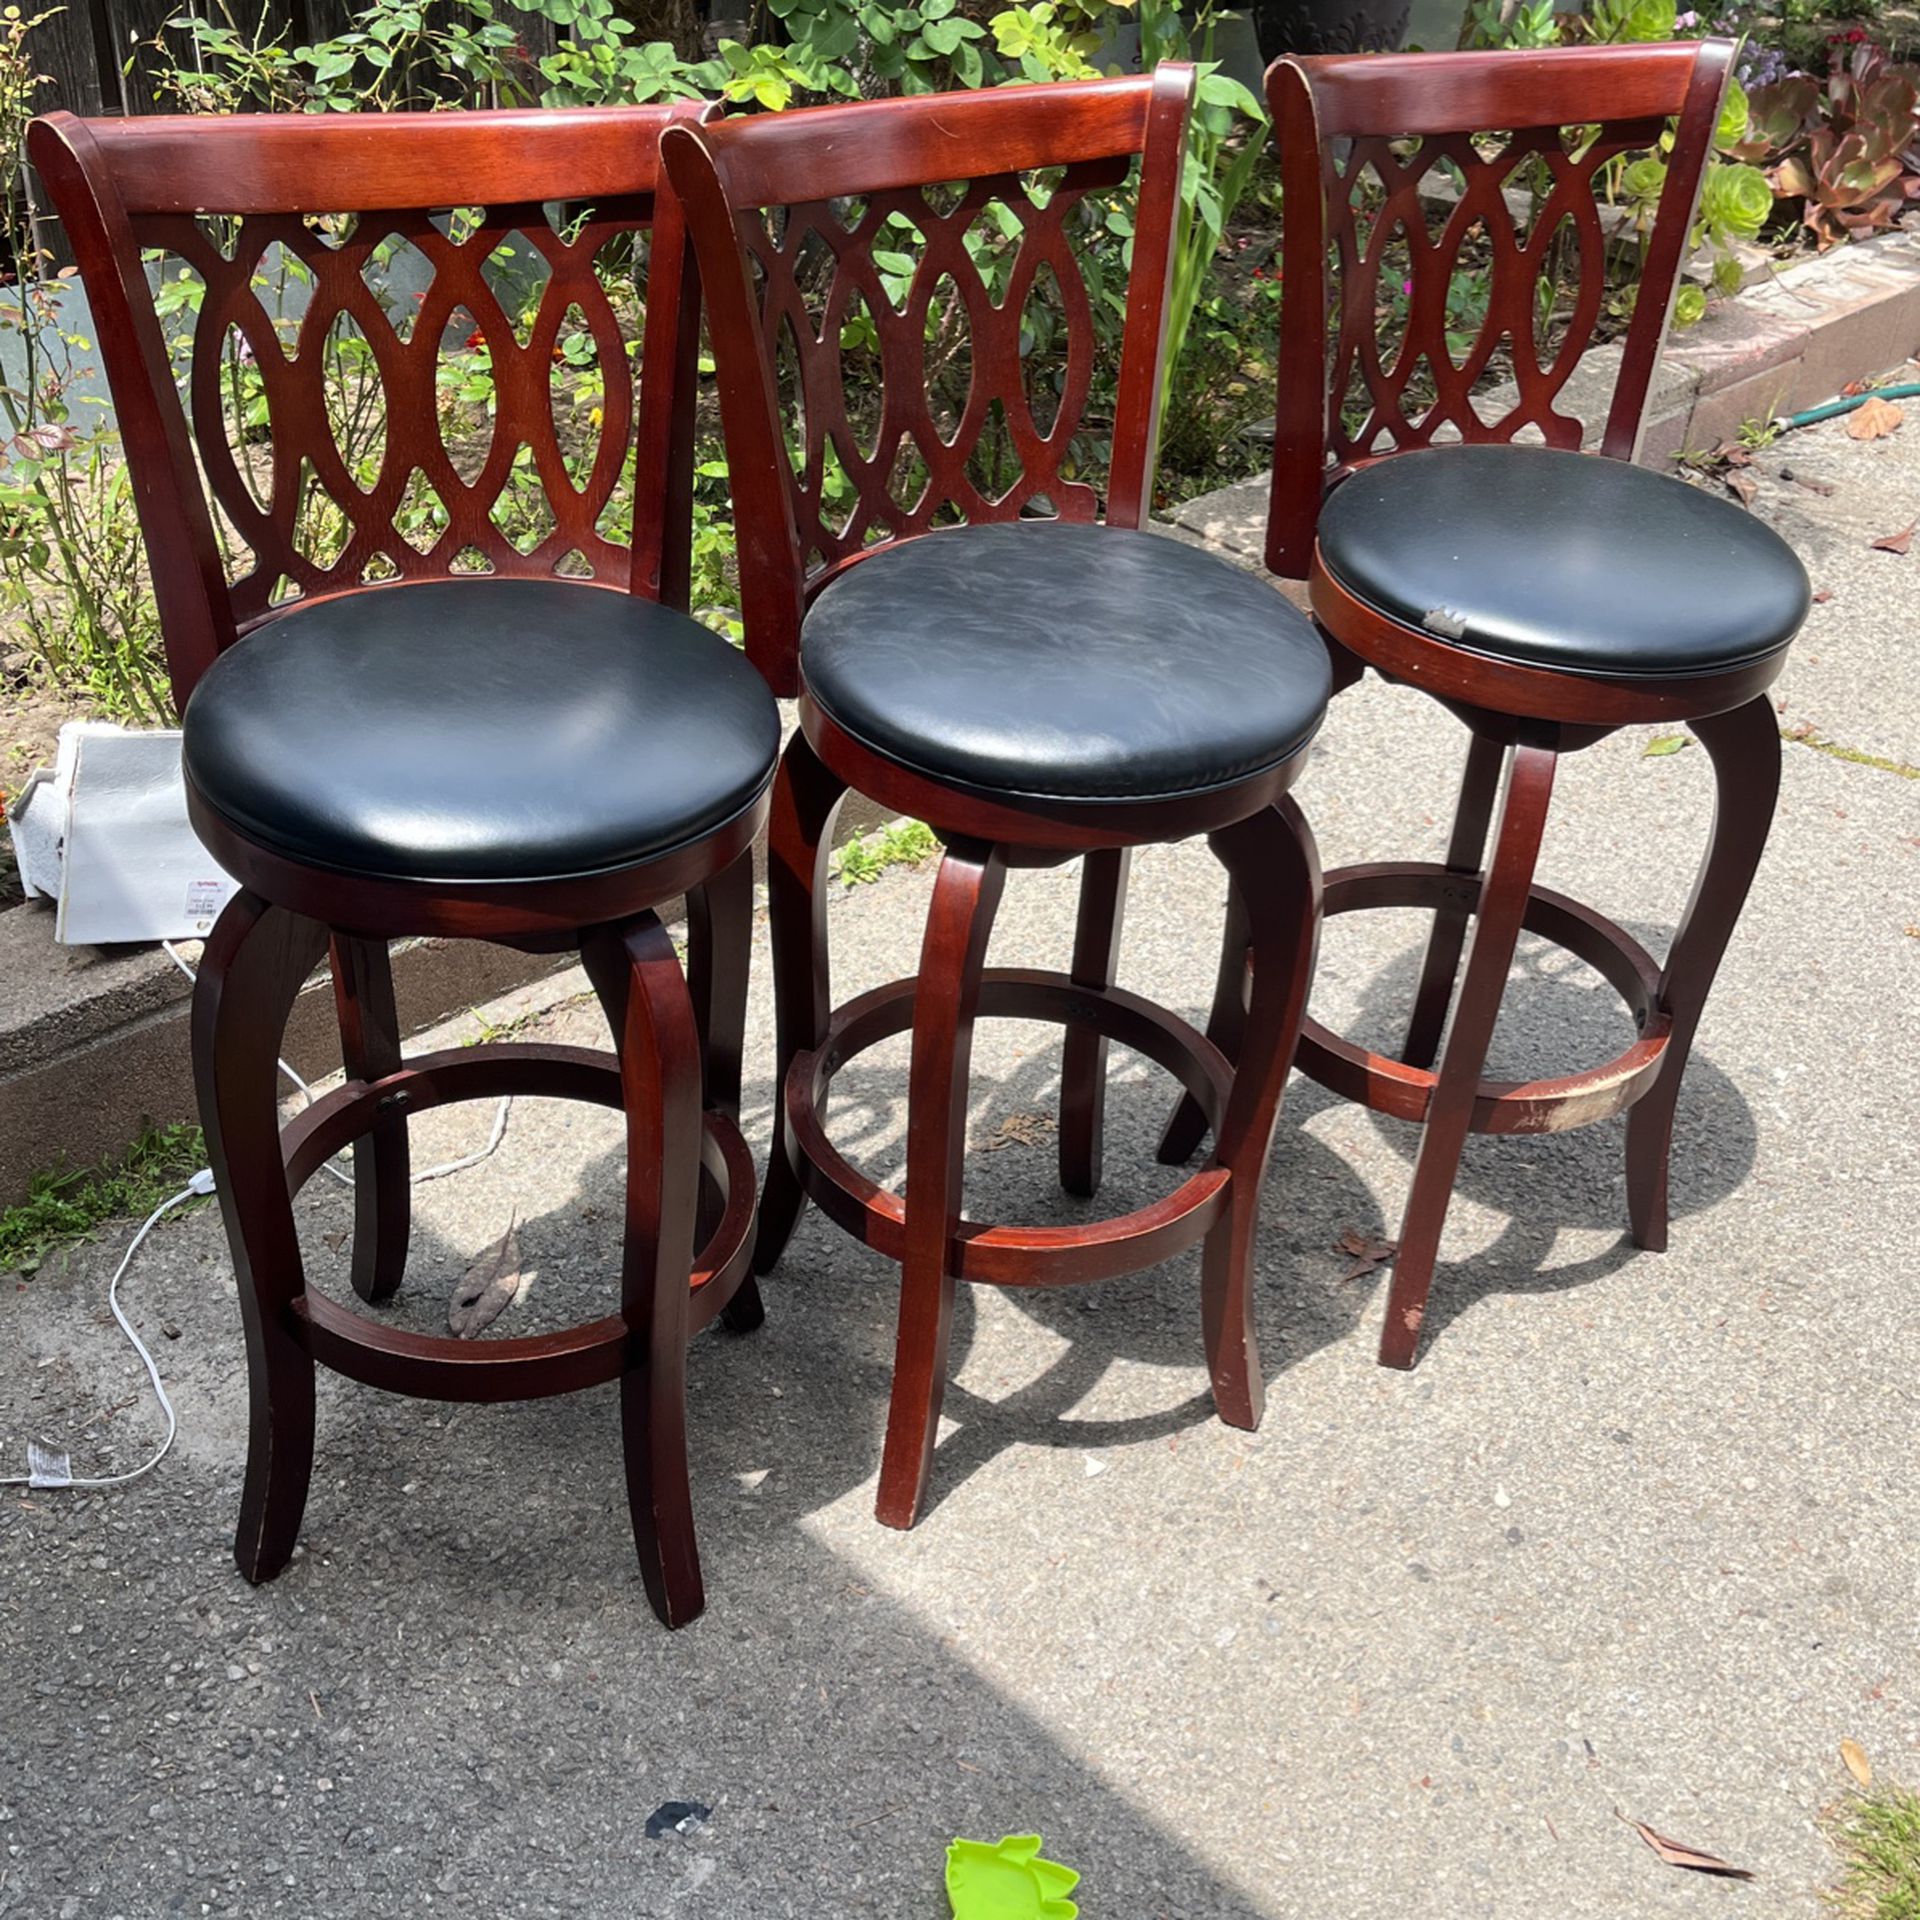 Counter stool chairs